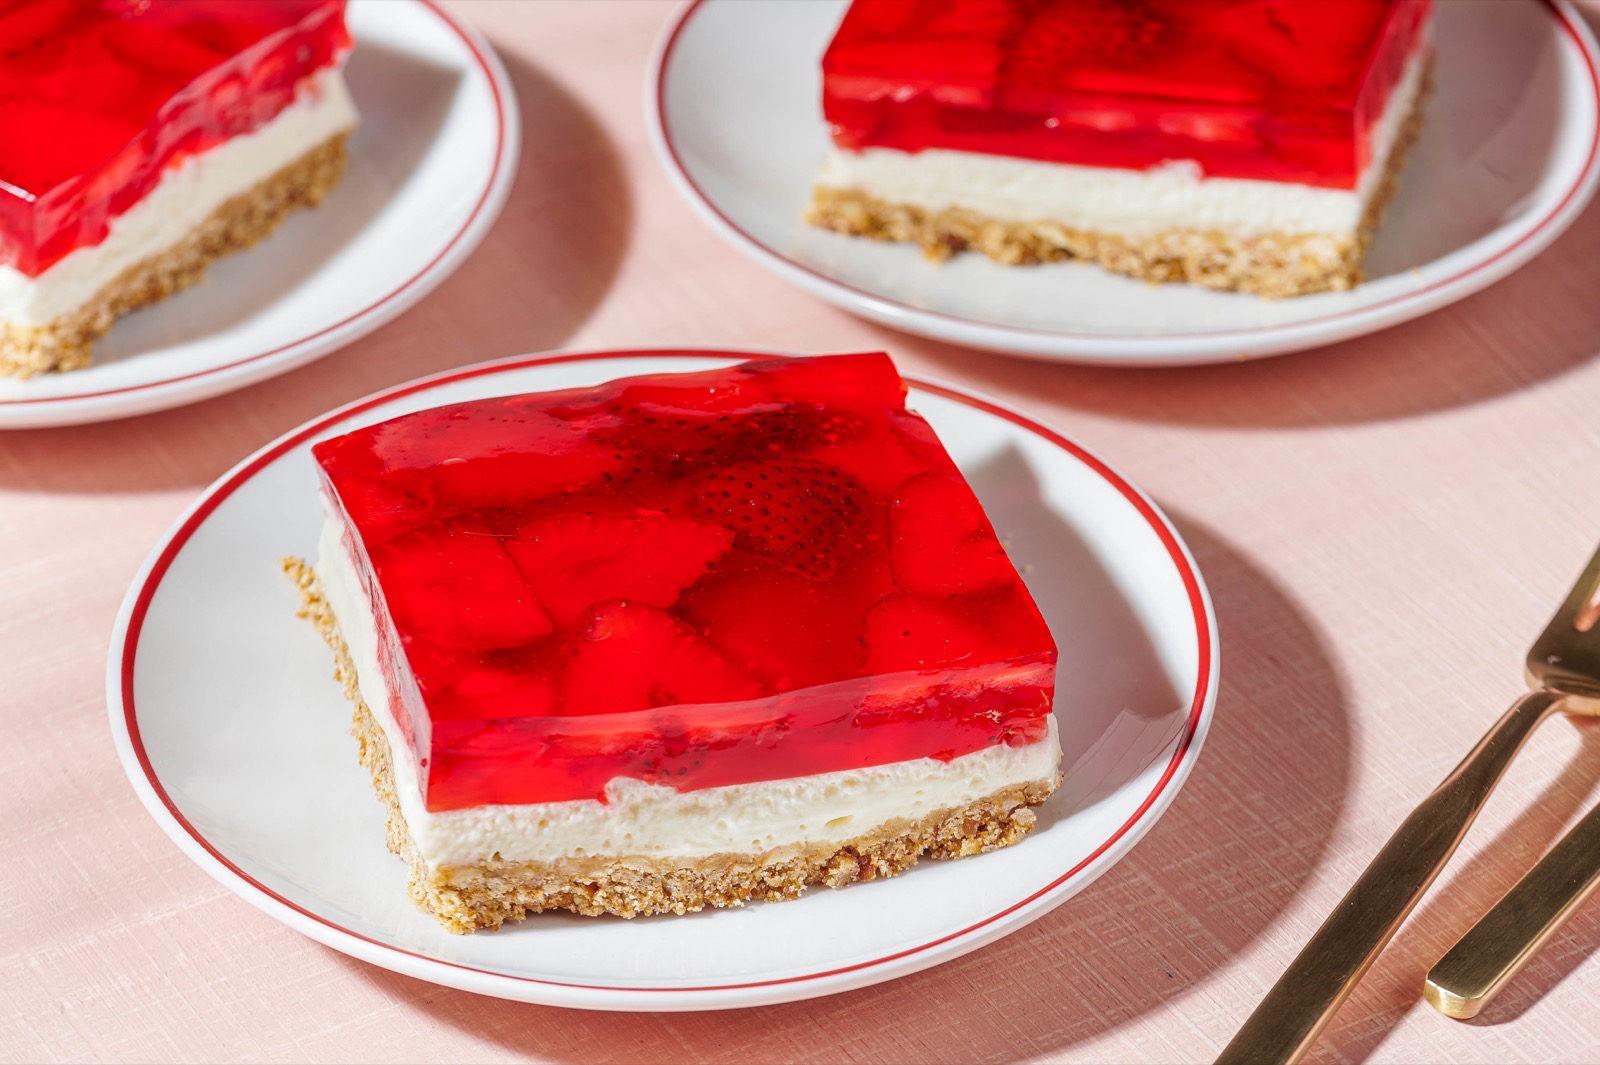 Trust Me, I Can Tell Which Generation You’re from Based on the Retro Food You Like Strawberry pretzel salad